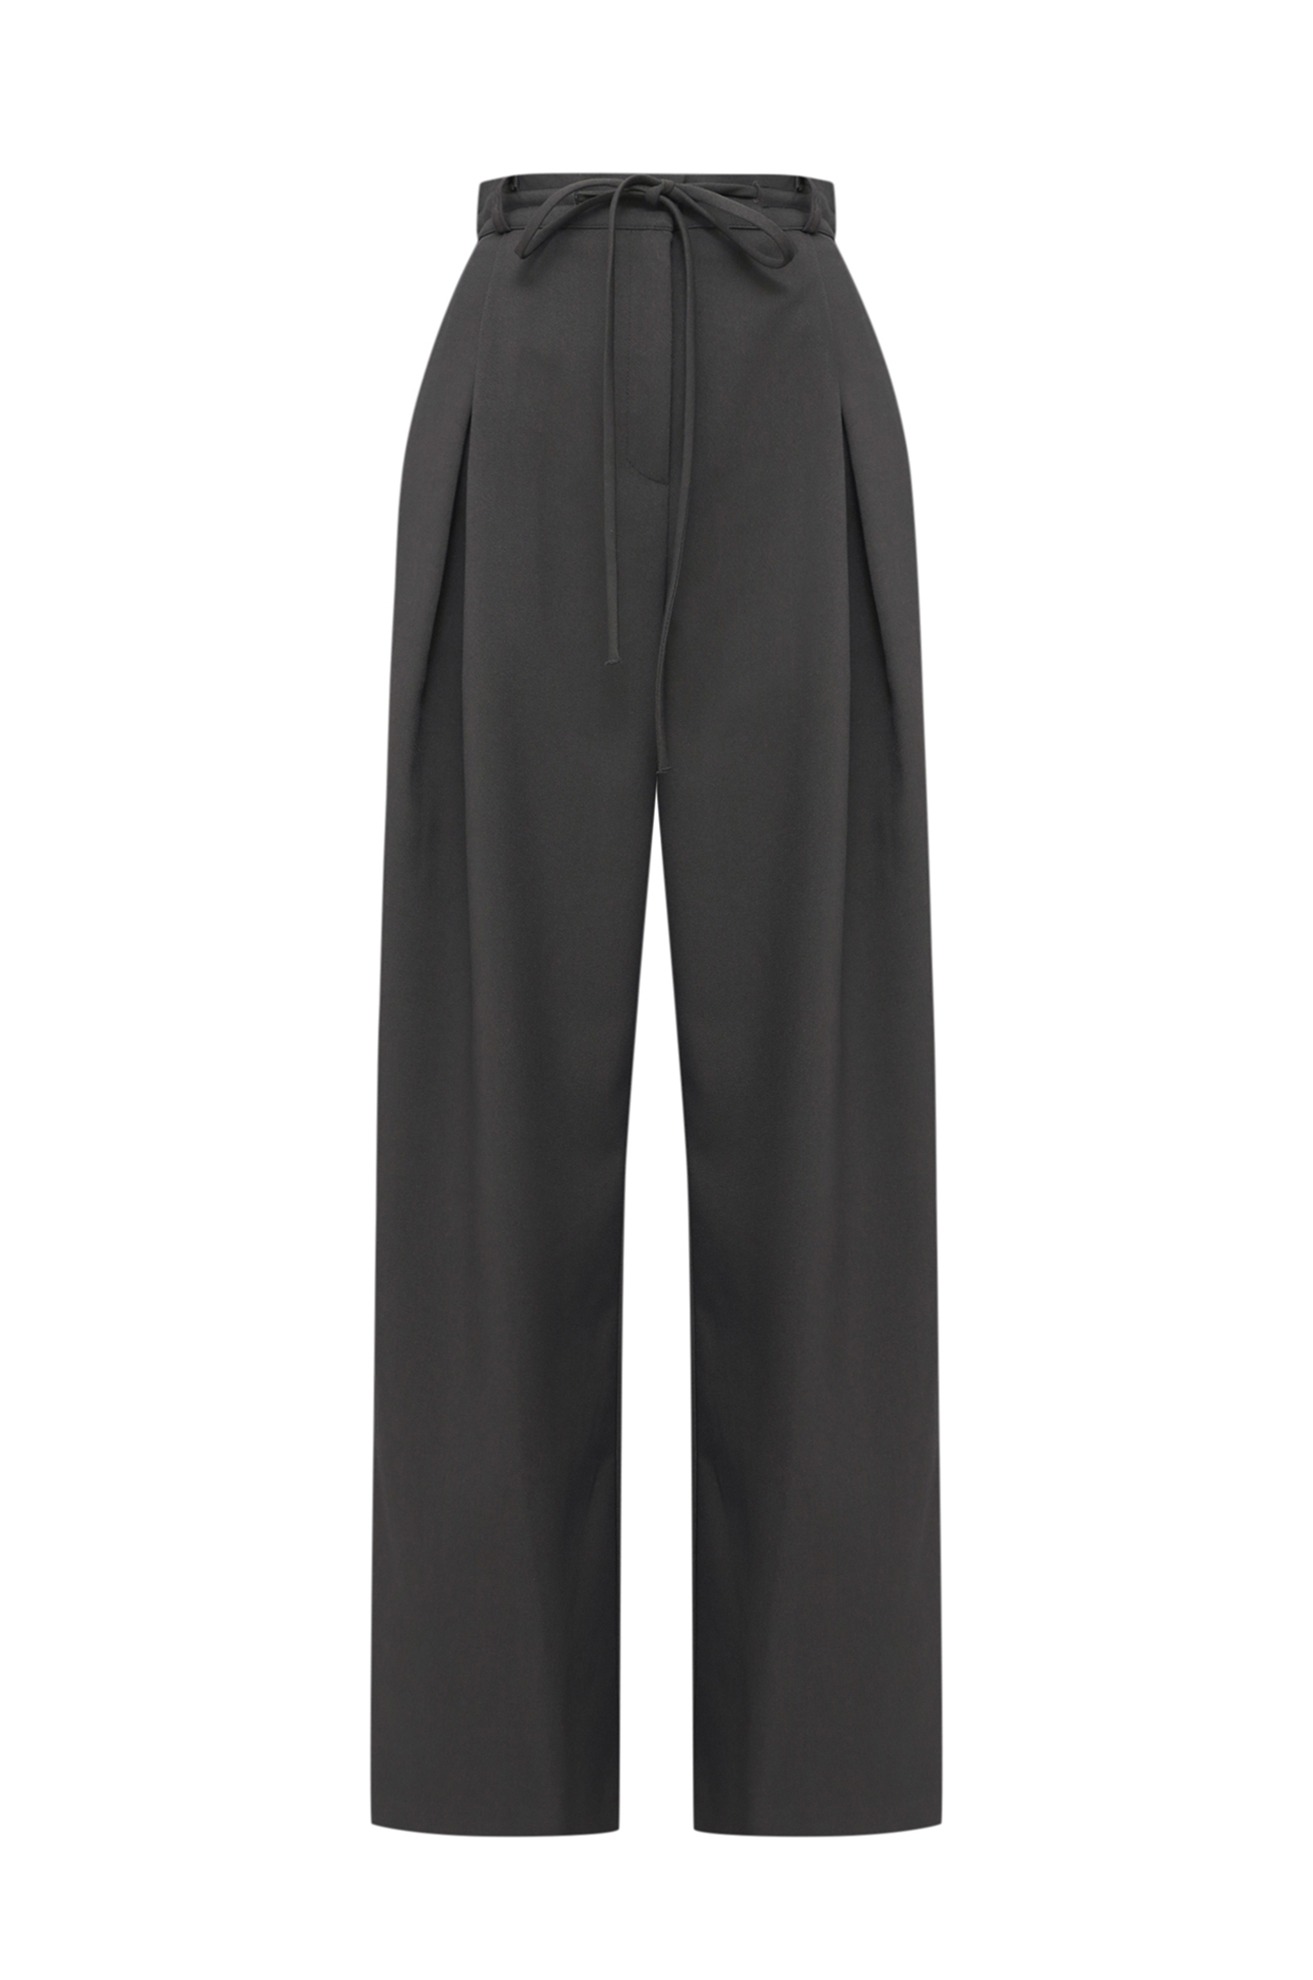 Waist String Pleated Trousers   2/13 순차발송